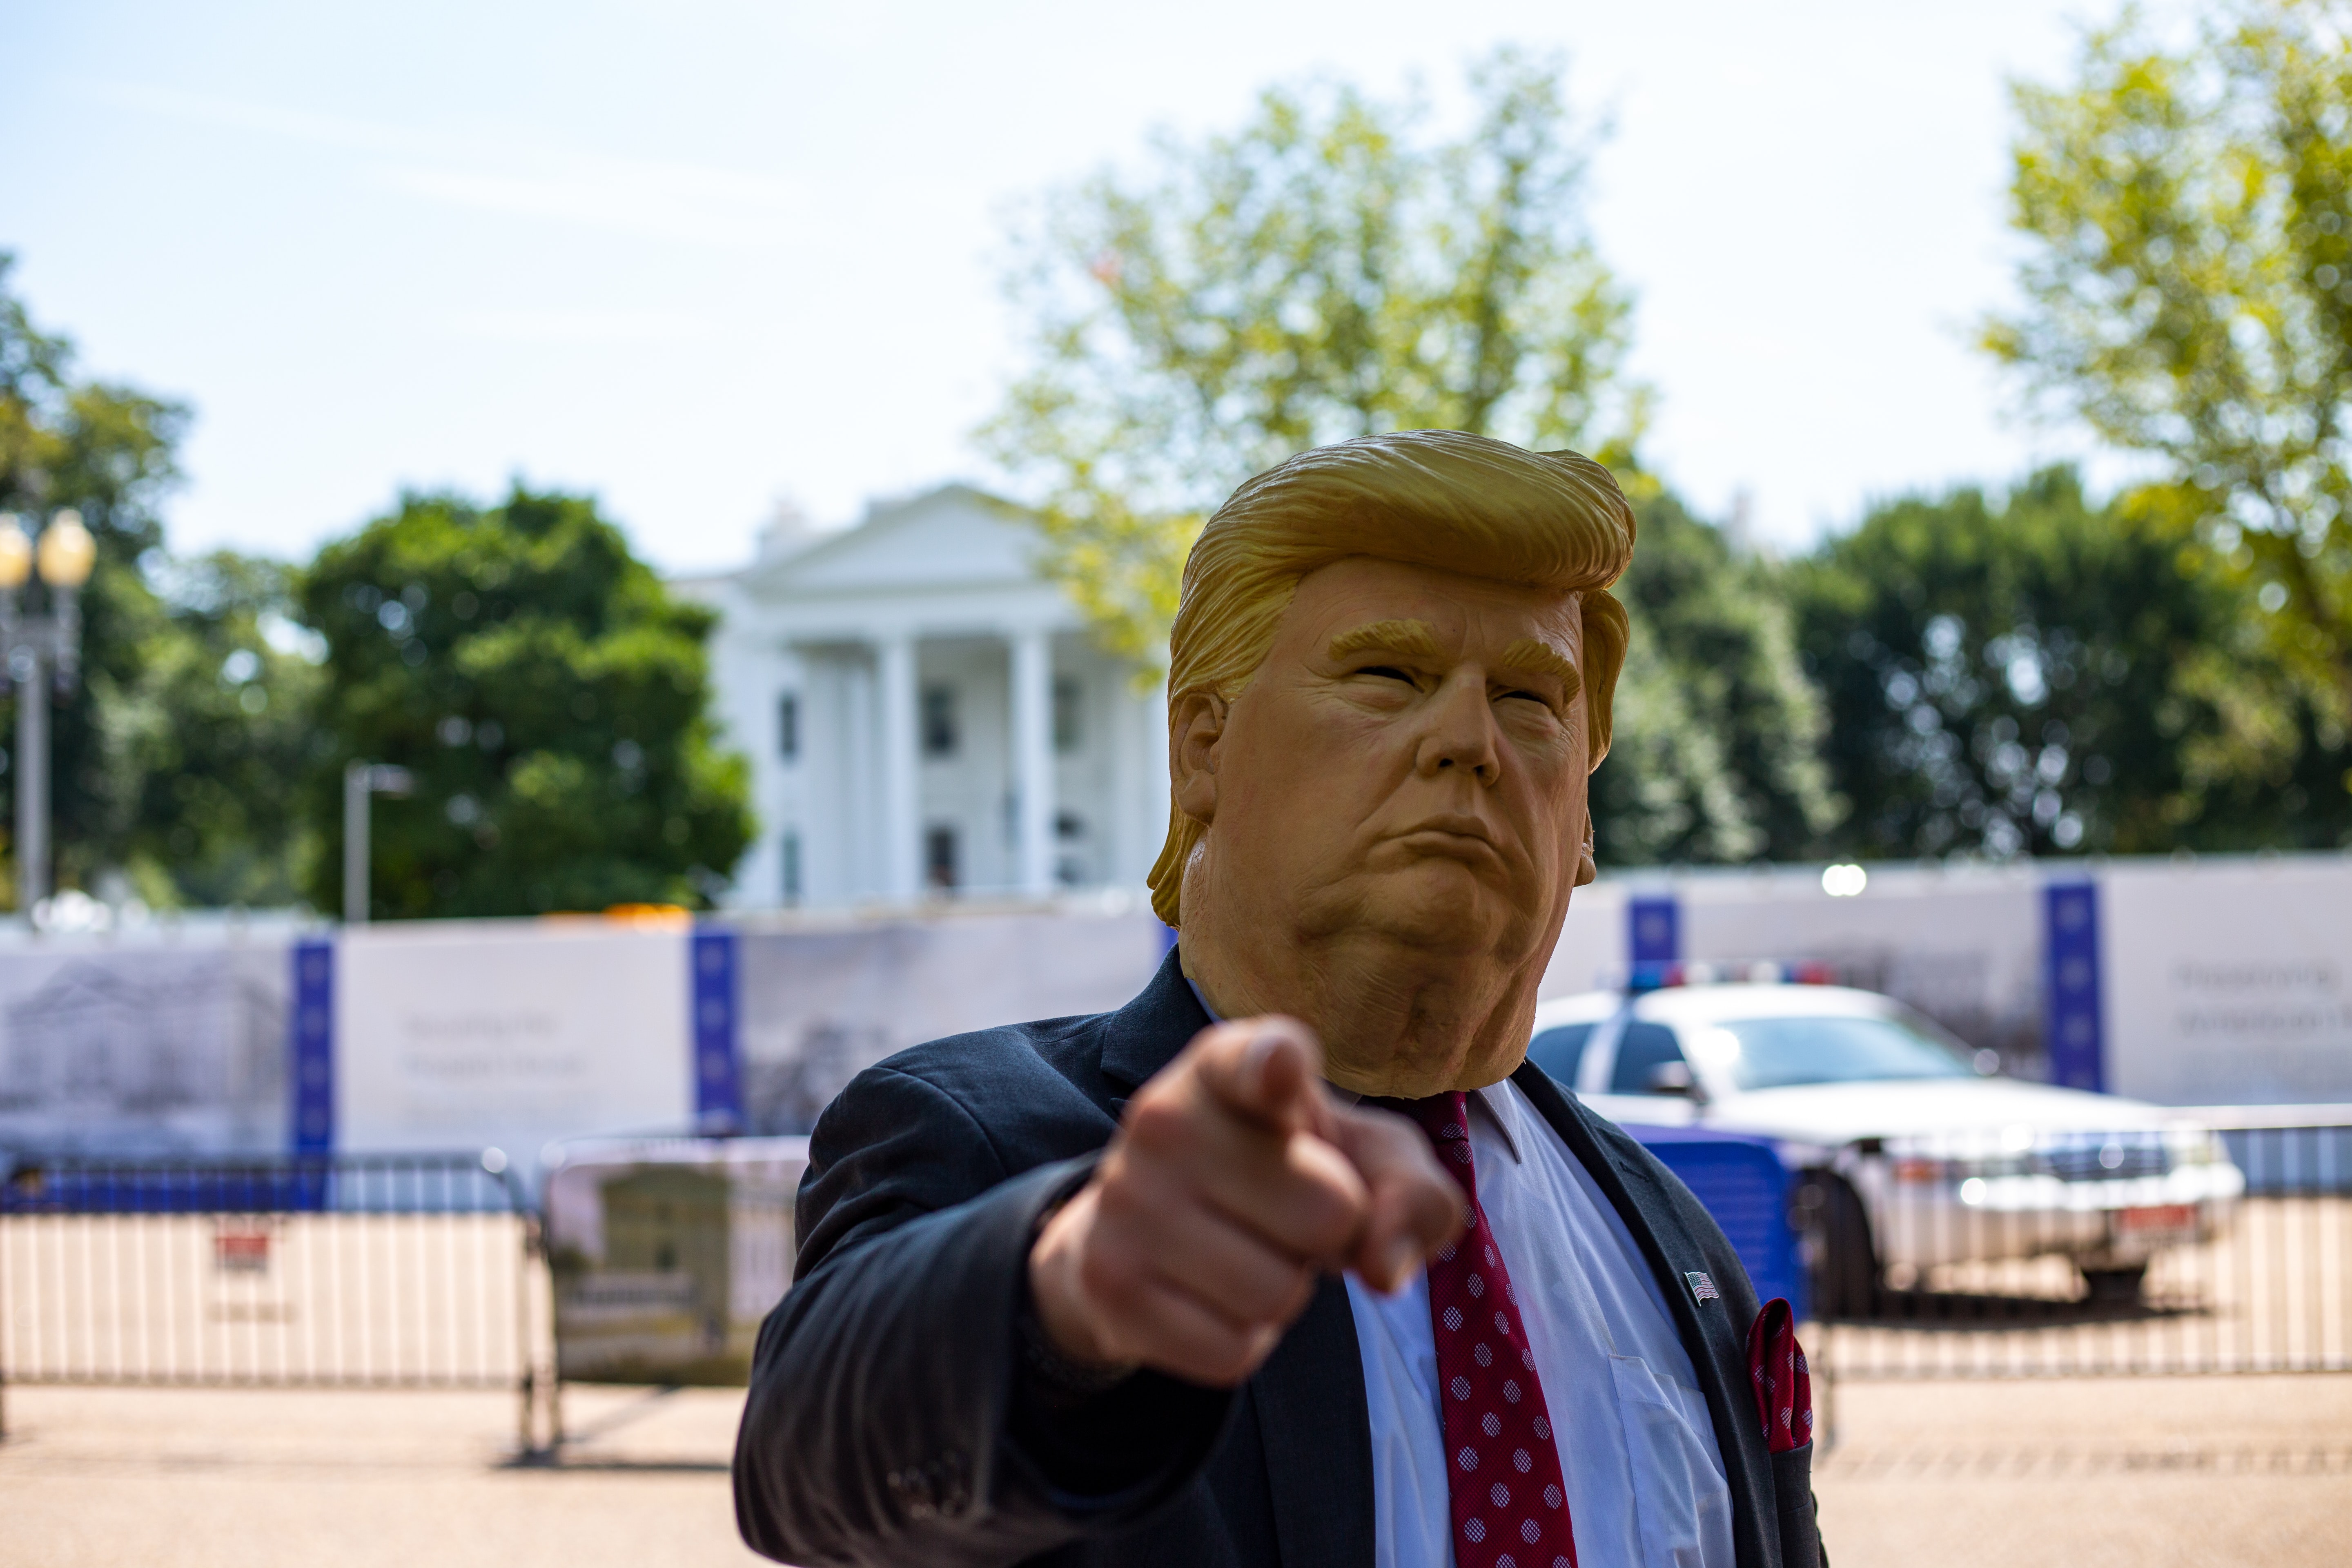 Trump wants YOU to learn about facts: “We love you, you’re very special.” Photo by Darren Halstead on Unsplash